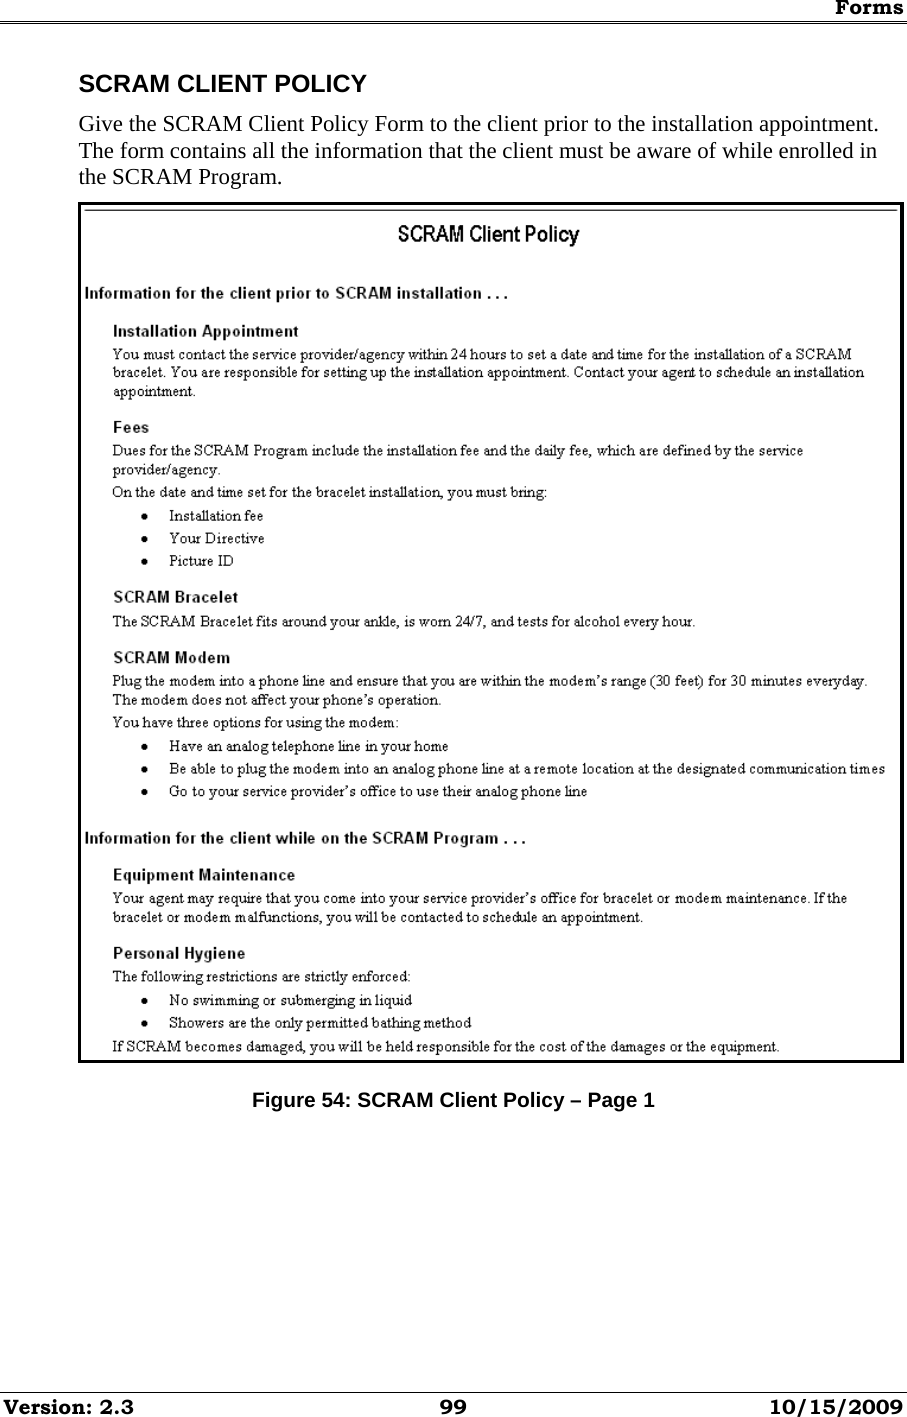 Forms Version: 2.3  99  10/15/2009 SCRAM CLIENT POLICY Give the SCRAM Client Policy Form to the client prior to the installation appointment. The form contains all the information that the client must be aware of while enrolled in the SCRAM Program.  Figure 54: SCRAM Client Policy – Page 1 